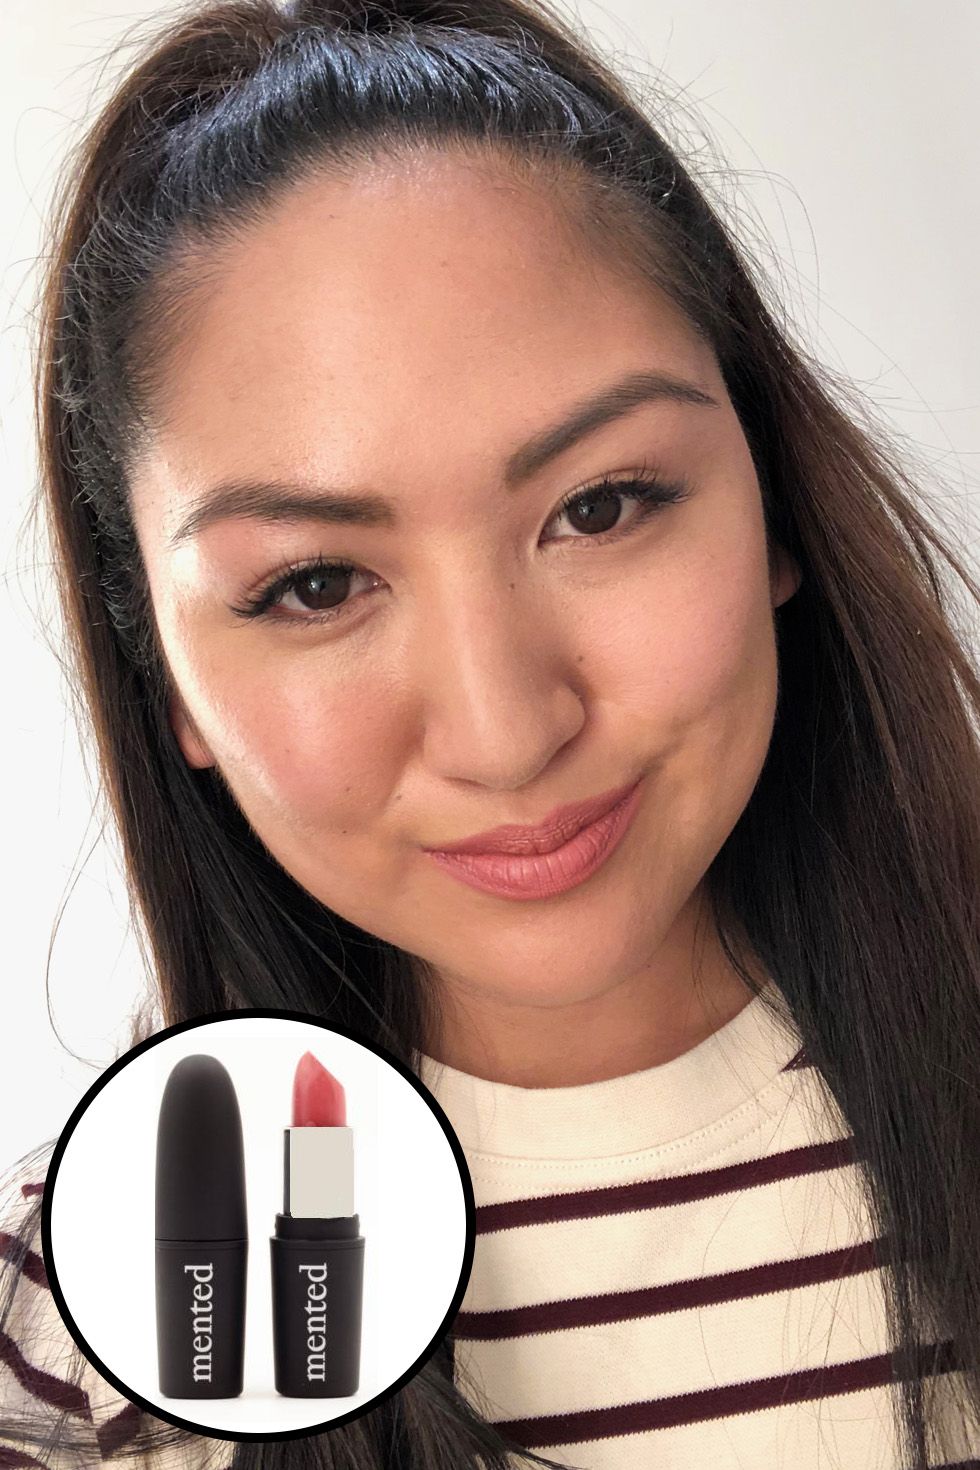 15 Best Lipsticks of All Time - I Own and Actually Use 150 